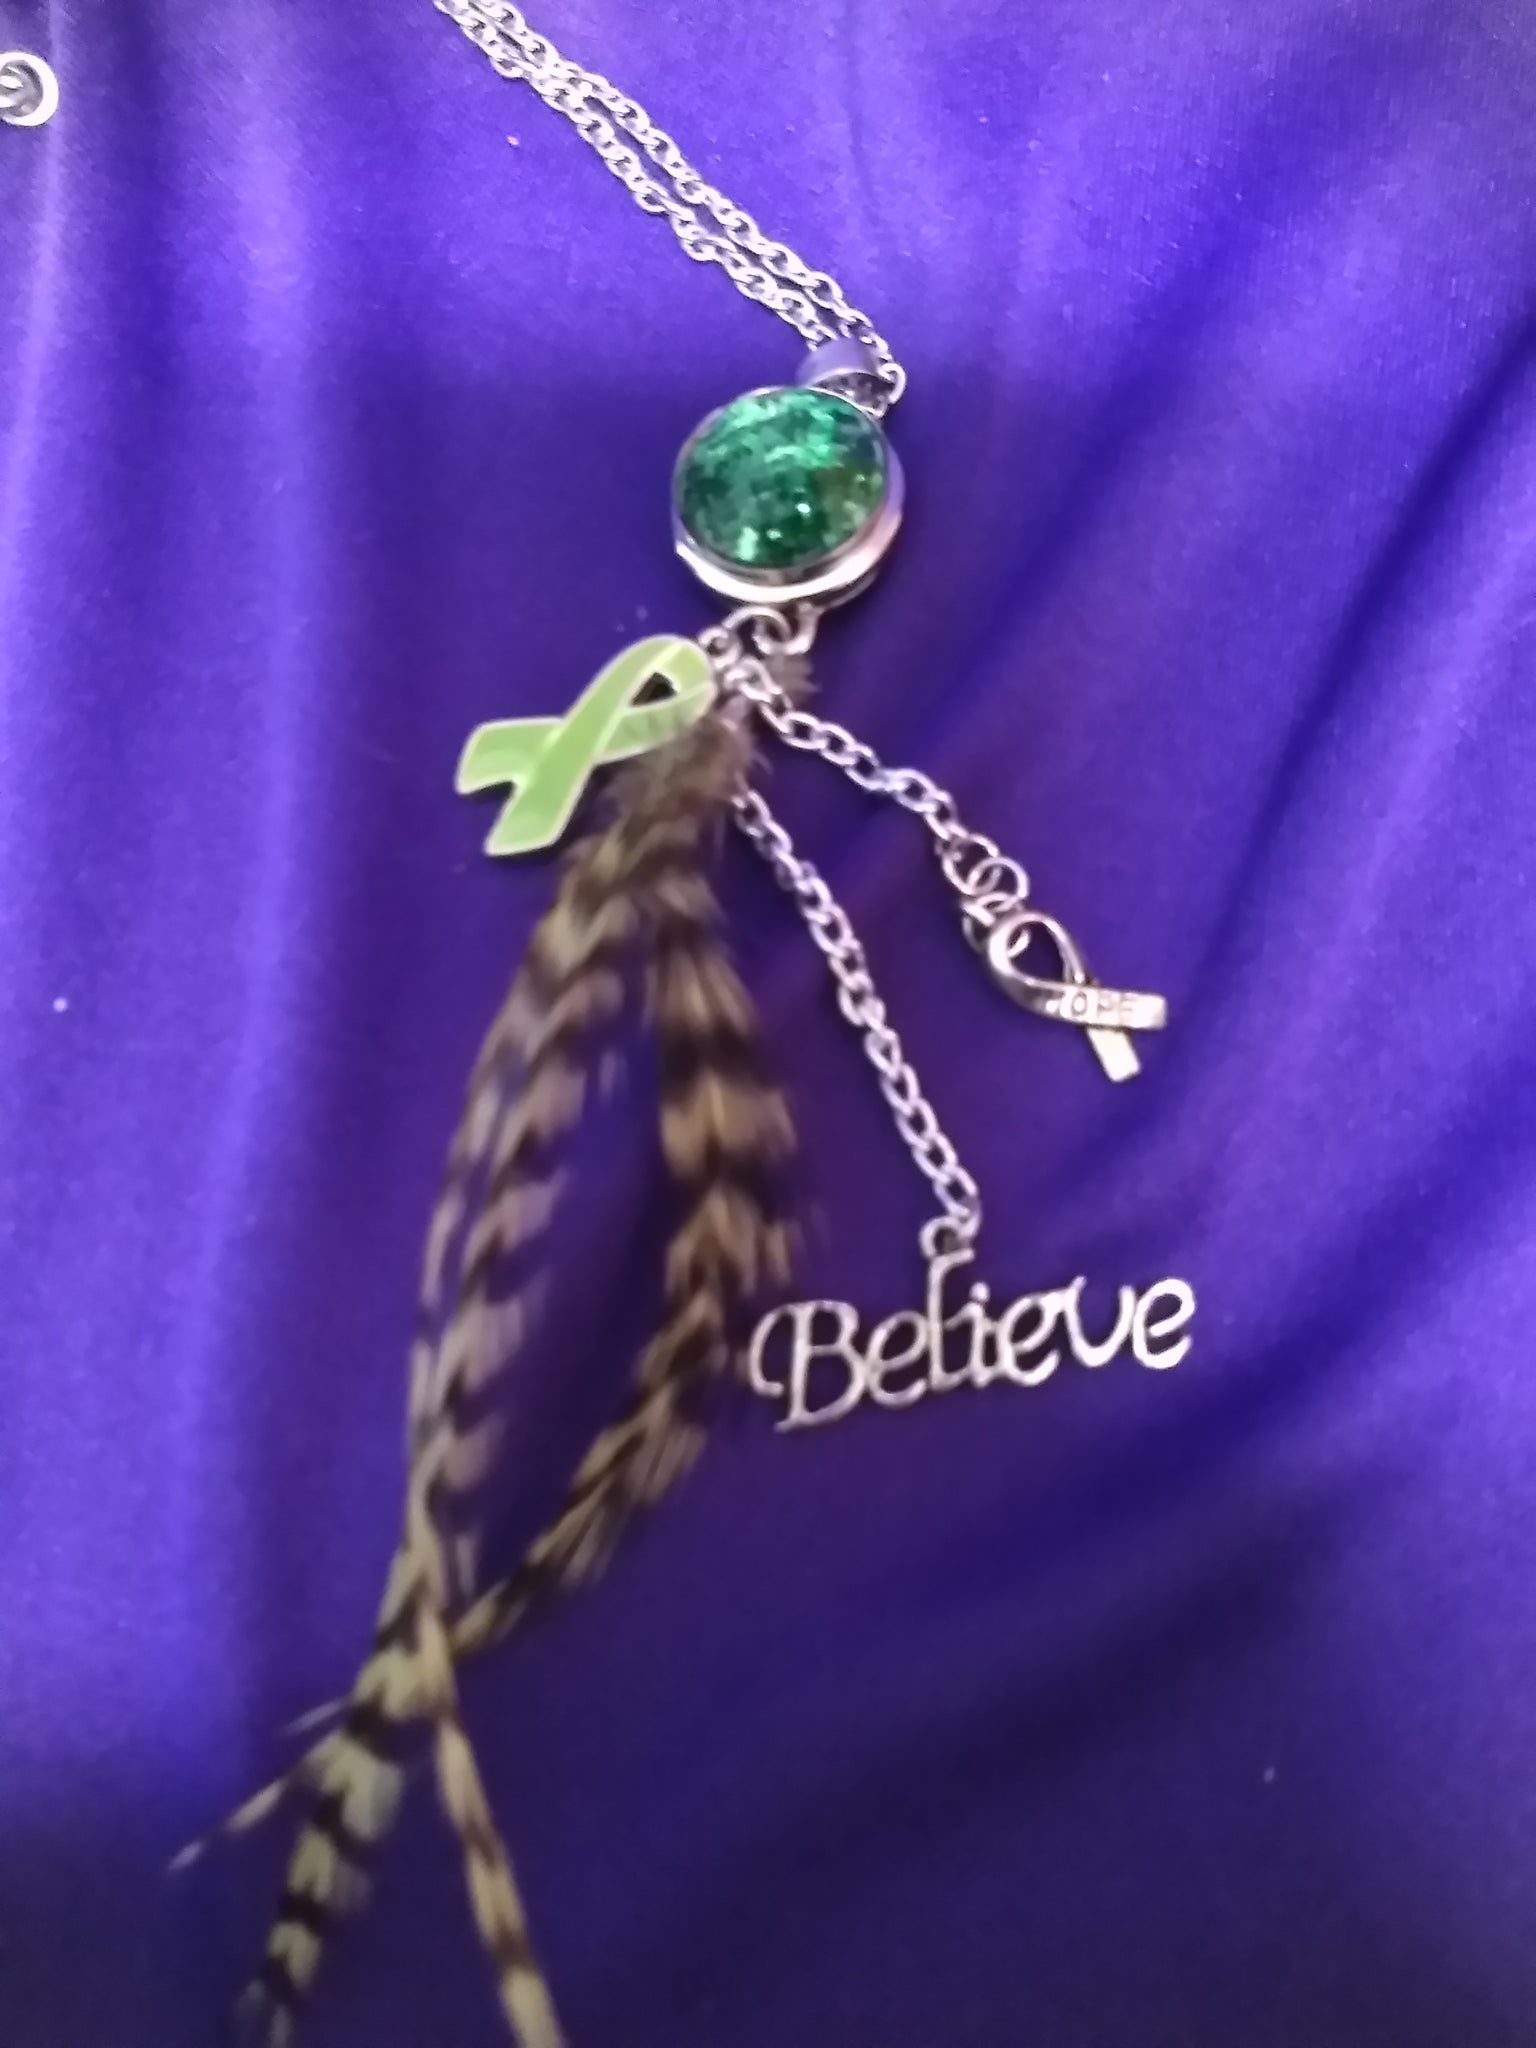 Lyme disease awareness pendant with changeable snap and feathers